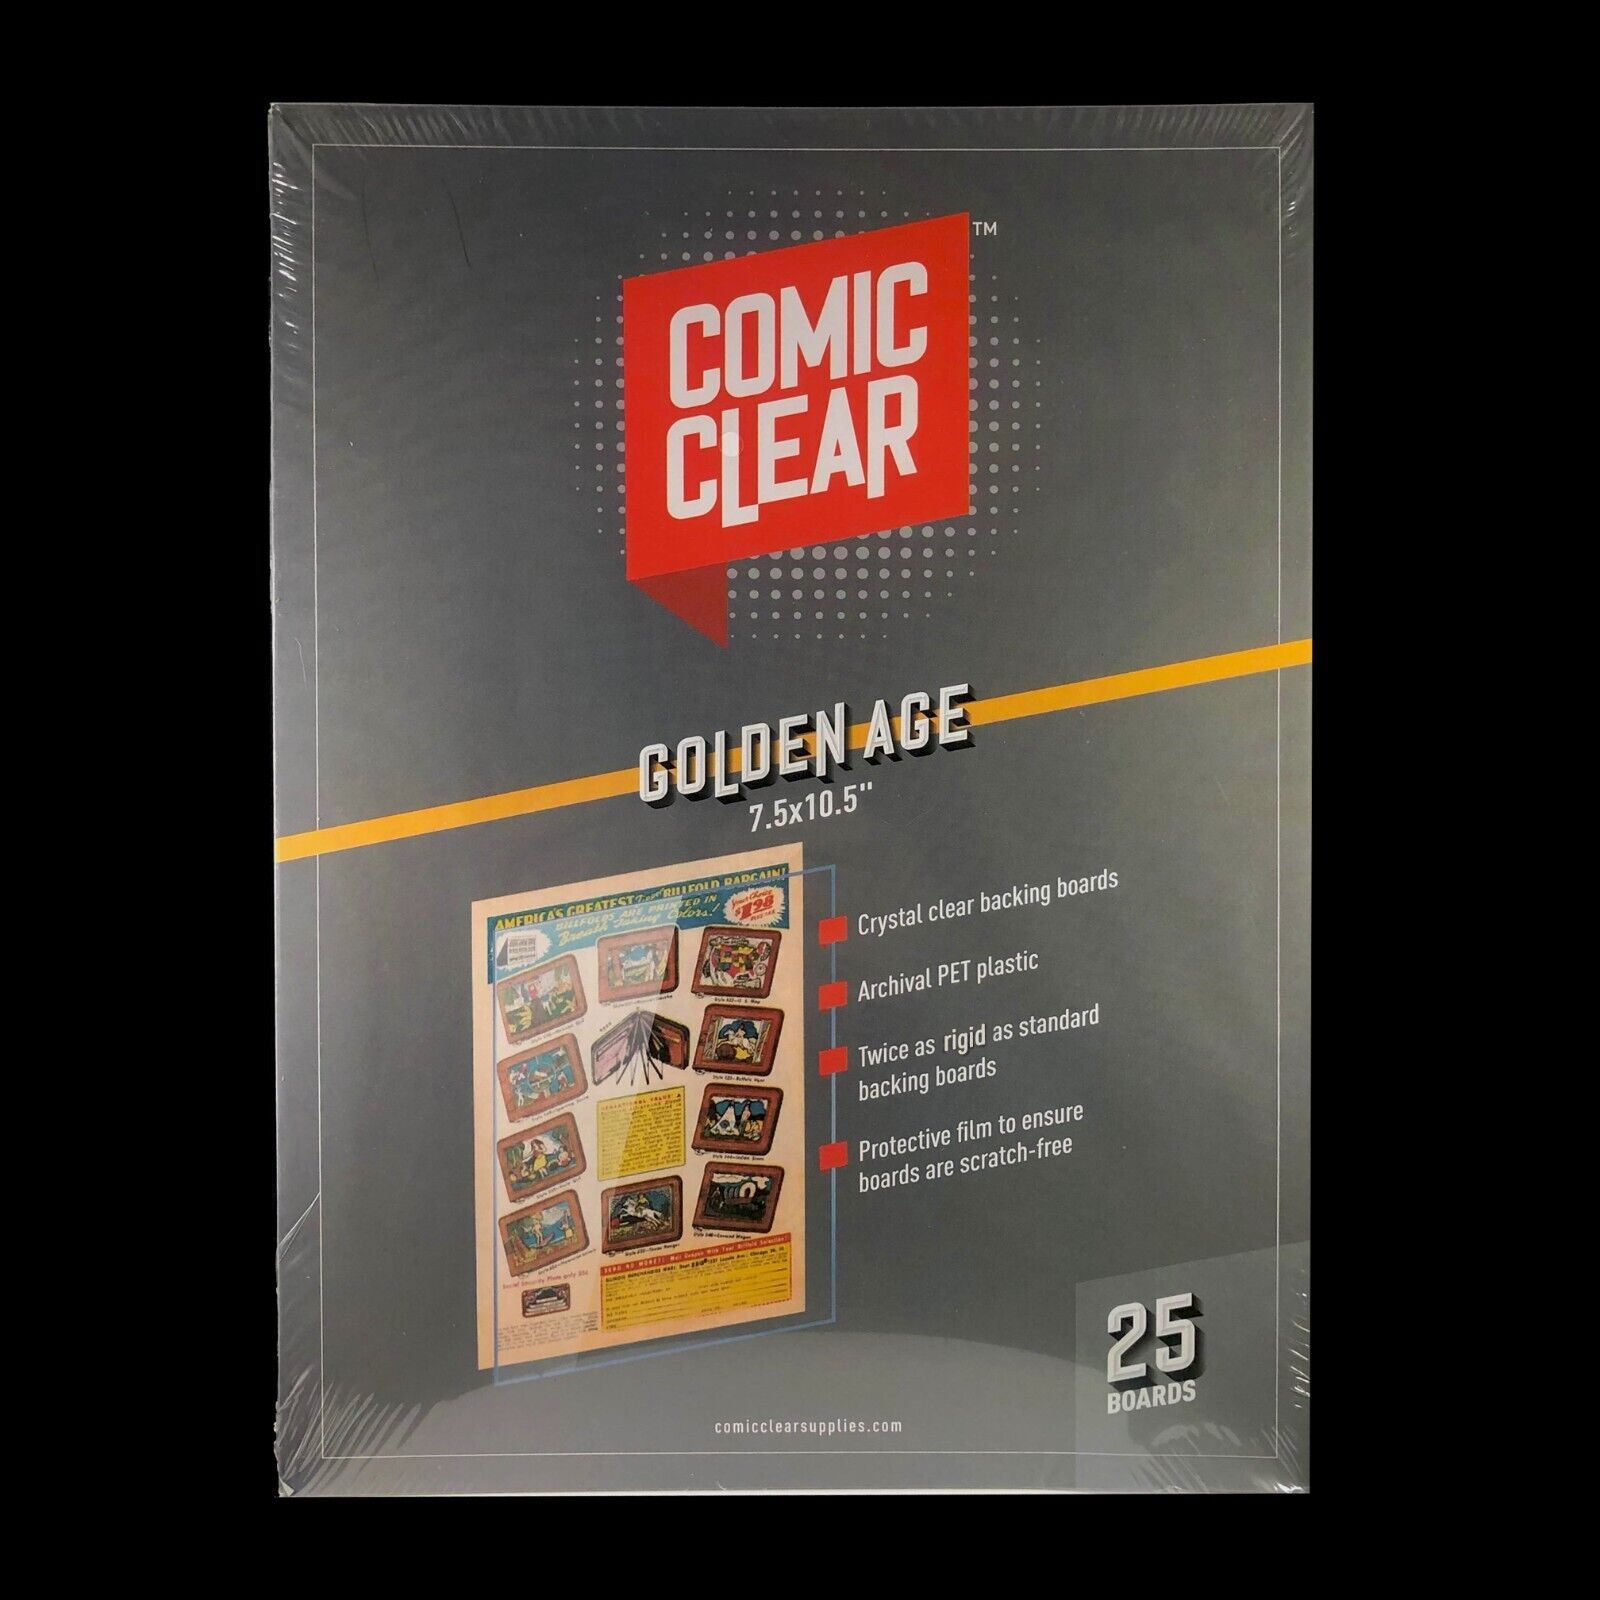 25-pack of Crystal-Clear Comic Clear Backing Boards - Golden Age Size